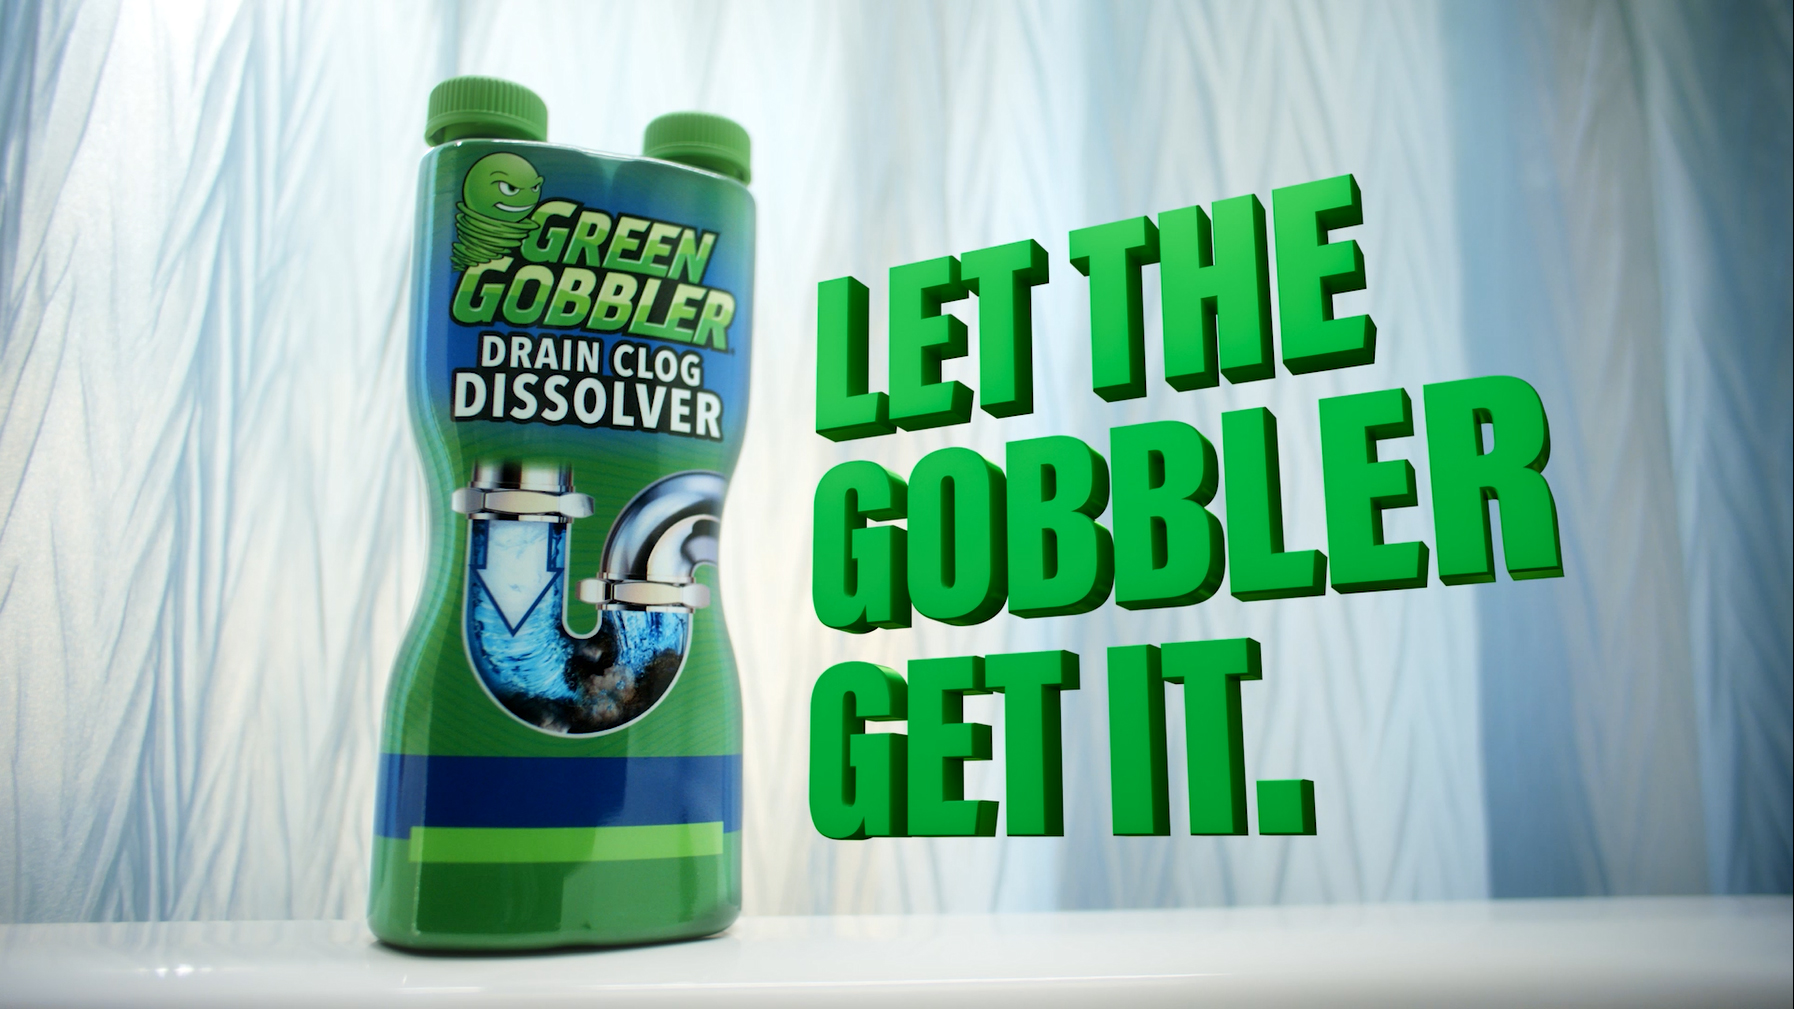 Green Gobbler Drain Clog Remover, Unscented, 15.5 Fluid Ounce, 2